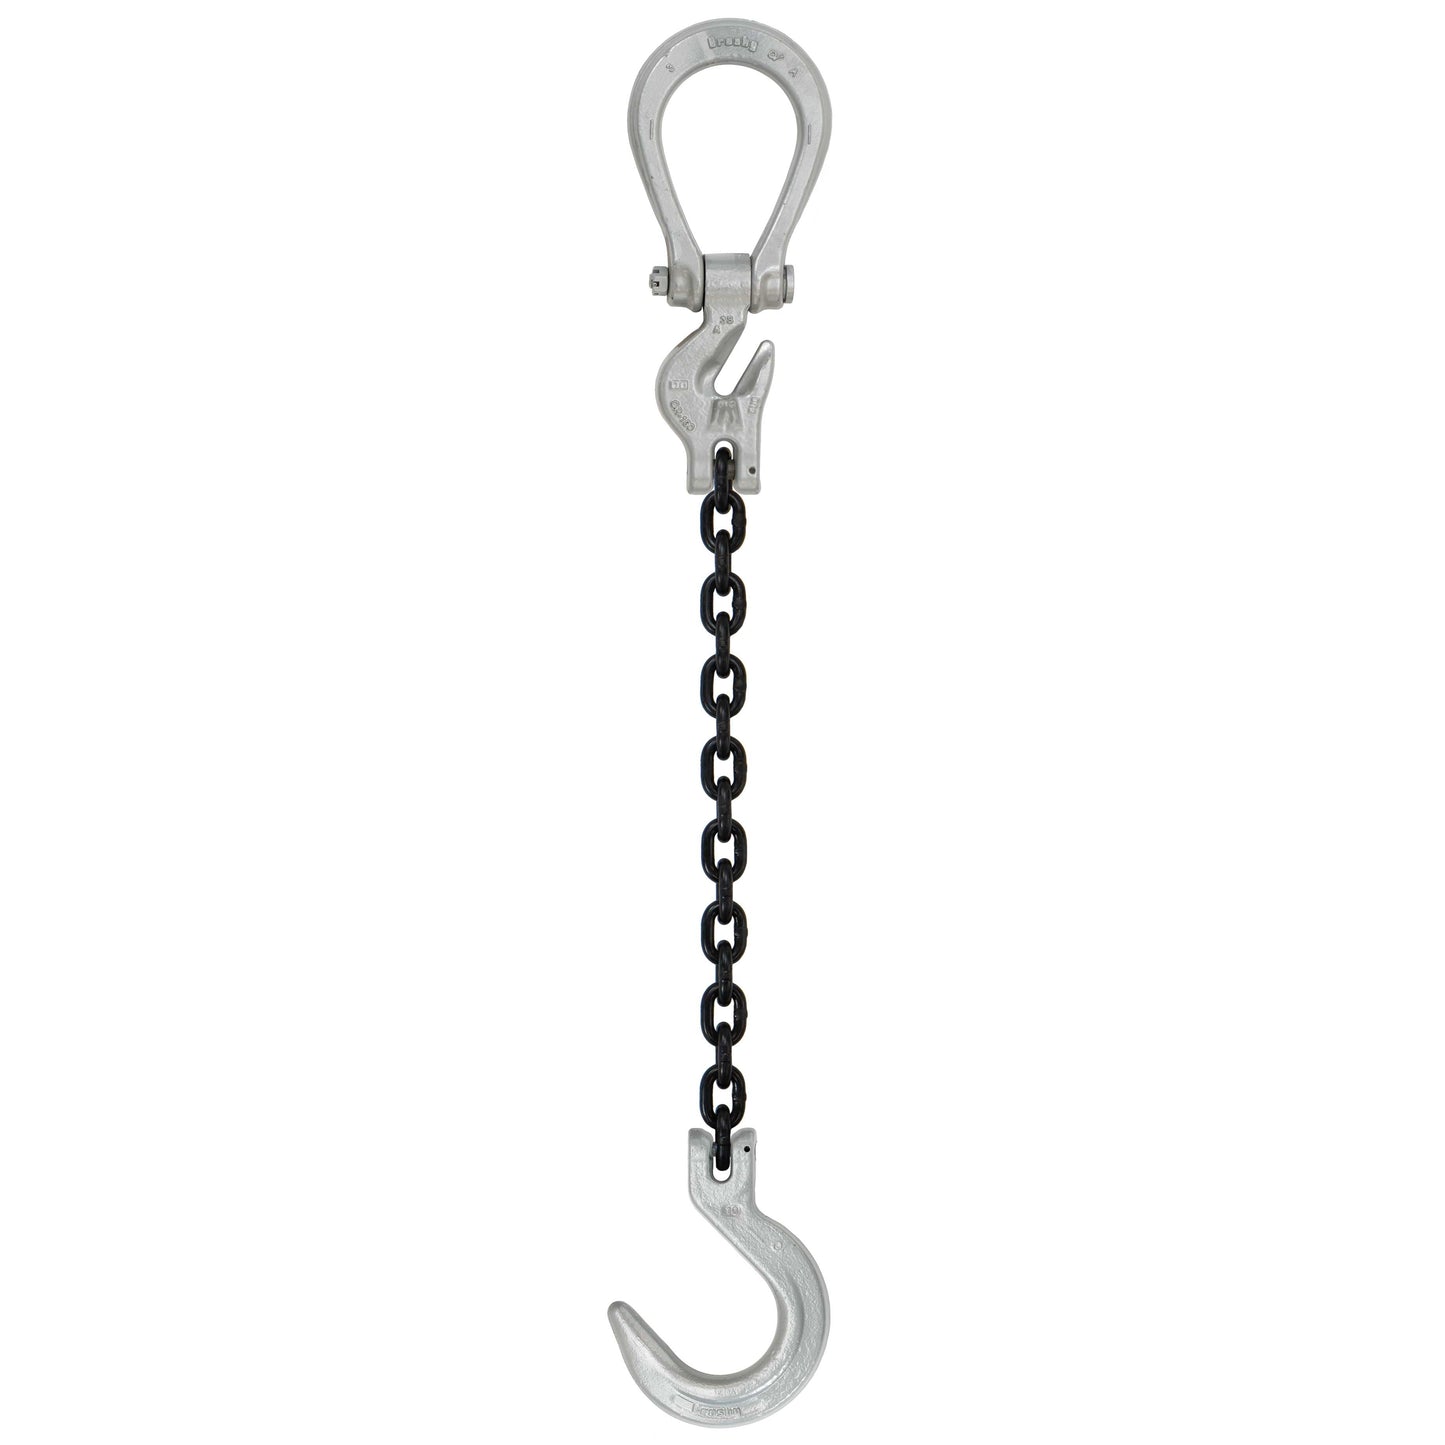 12 inch x 10 foot Domestic Adjustable Single Leg Chain Sling w Crosby Foundry Hook Grade 100 image 1 of 2